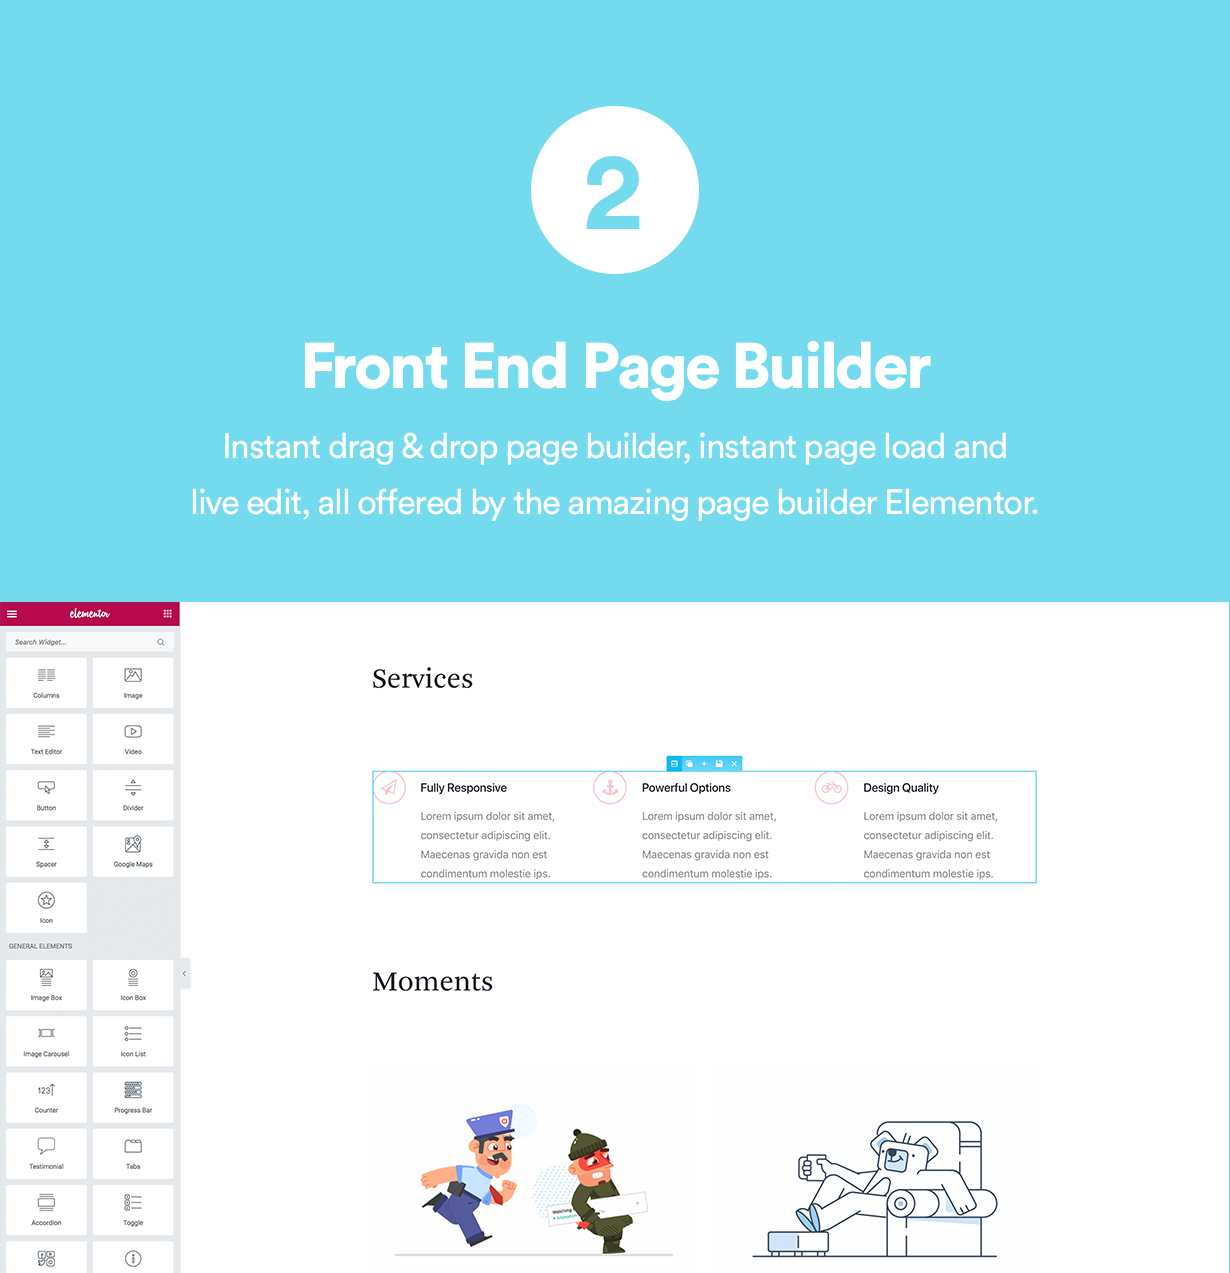 Front End Page Builder